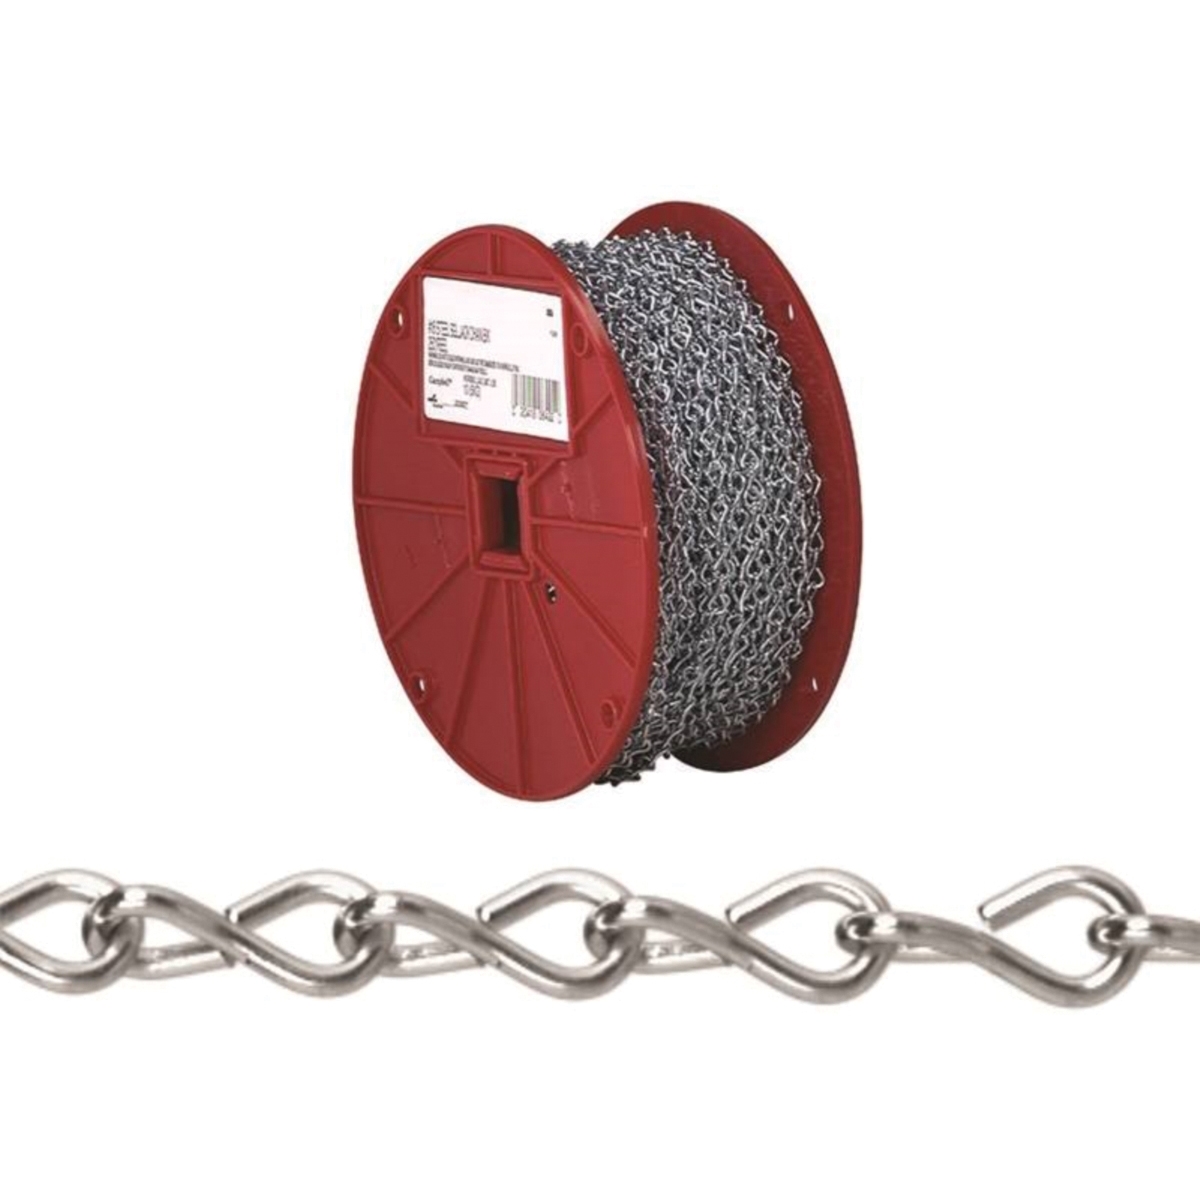 Campbell AW0801427 Single Jack Chain, #14, Carbon Steel, Zinc, 16 lb Working Load - 1